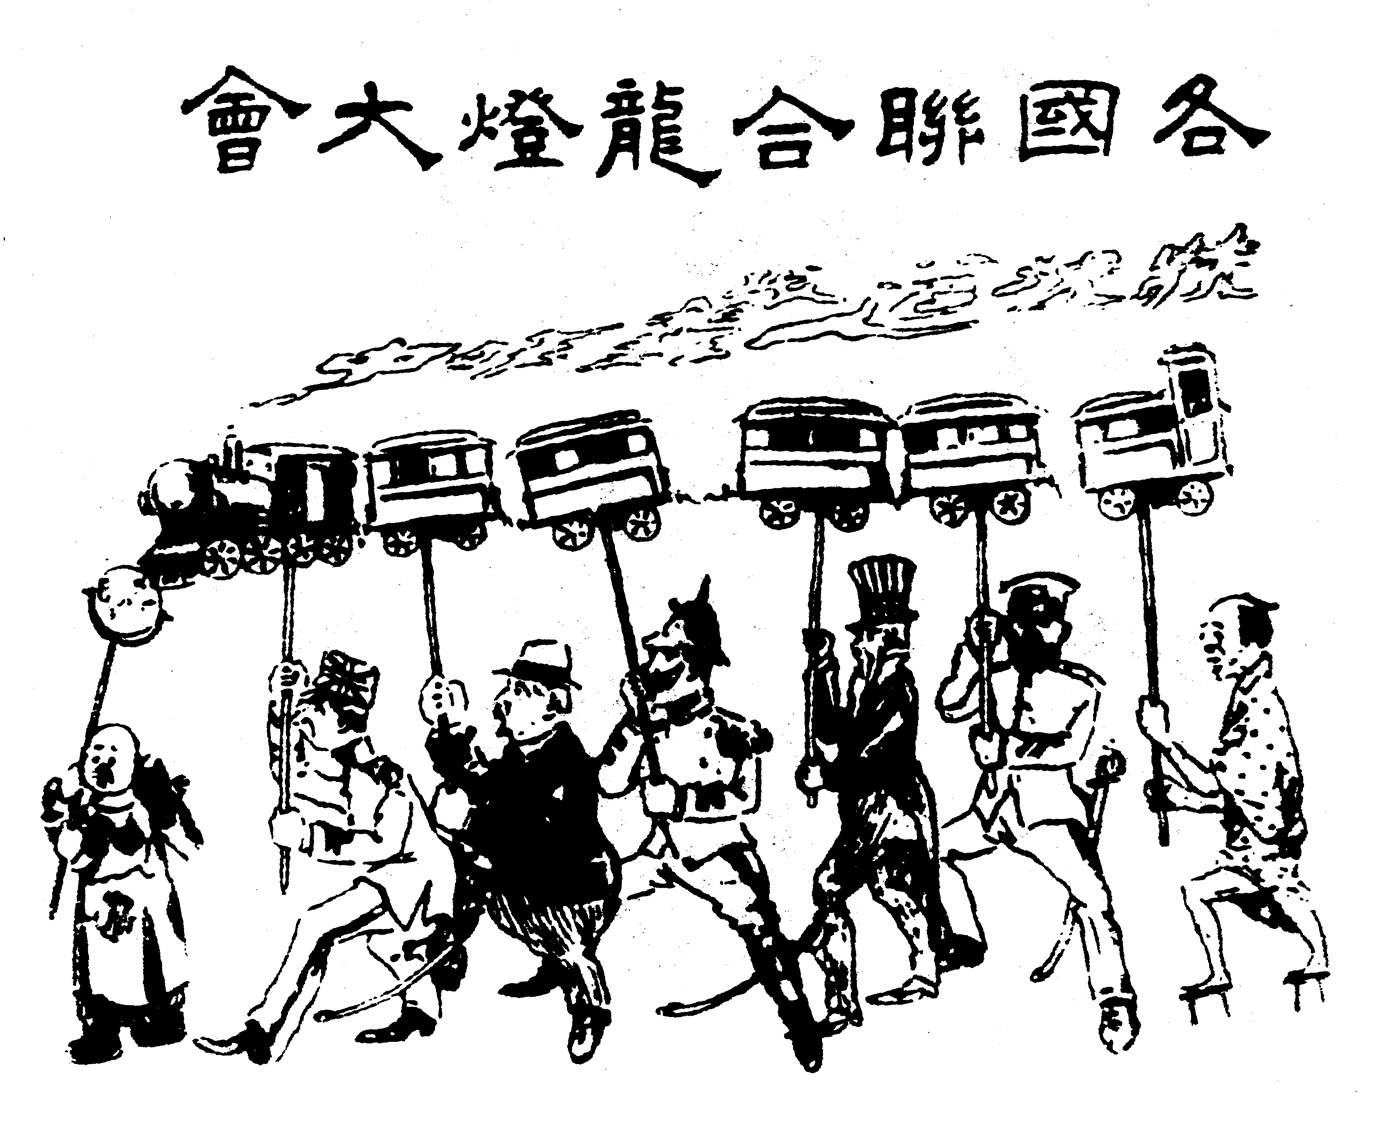 Public Lecture - Sharing Session on "Between the Lines – The Chinese Cartoon Revolution” 